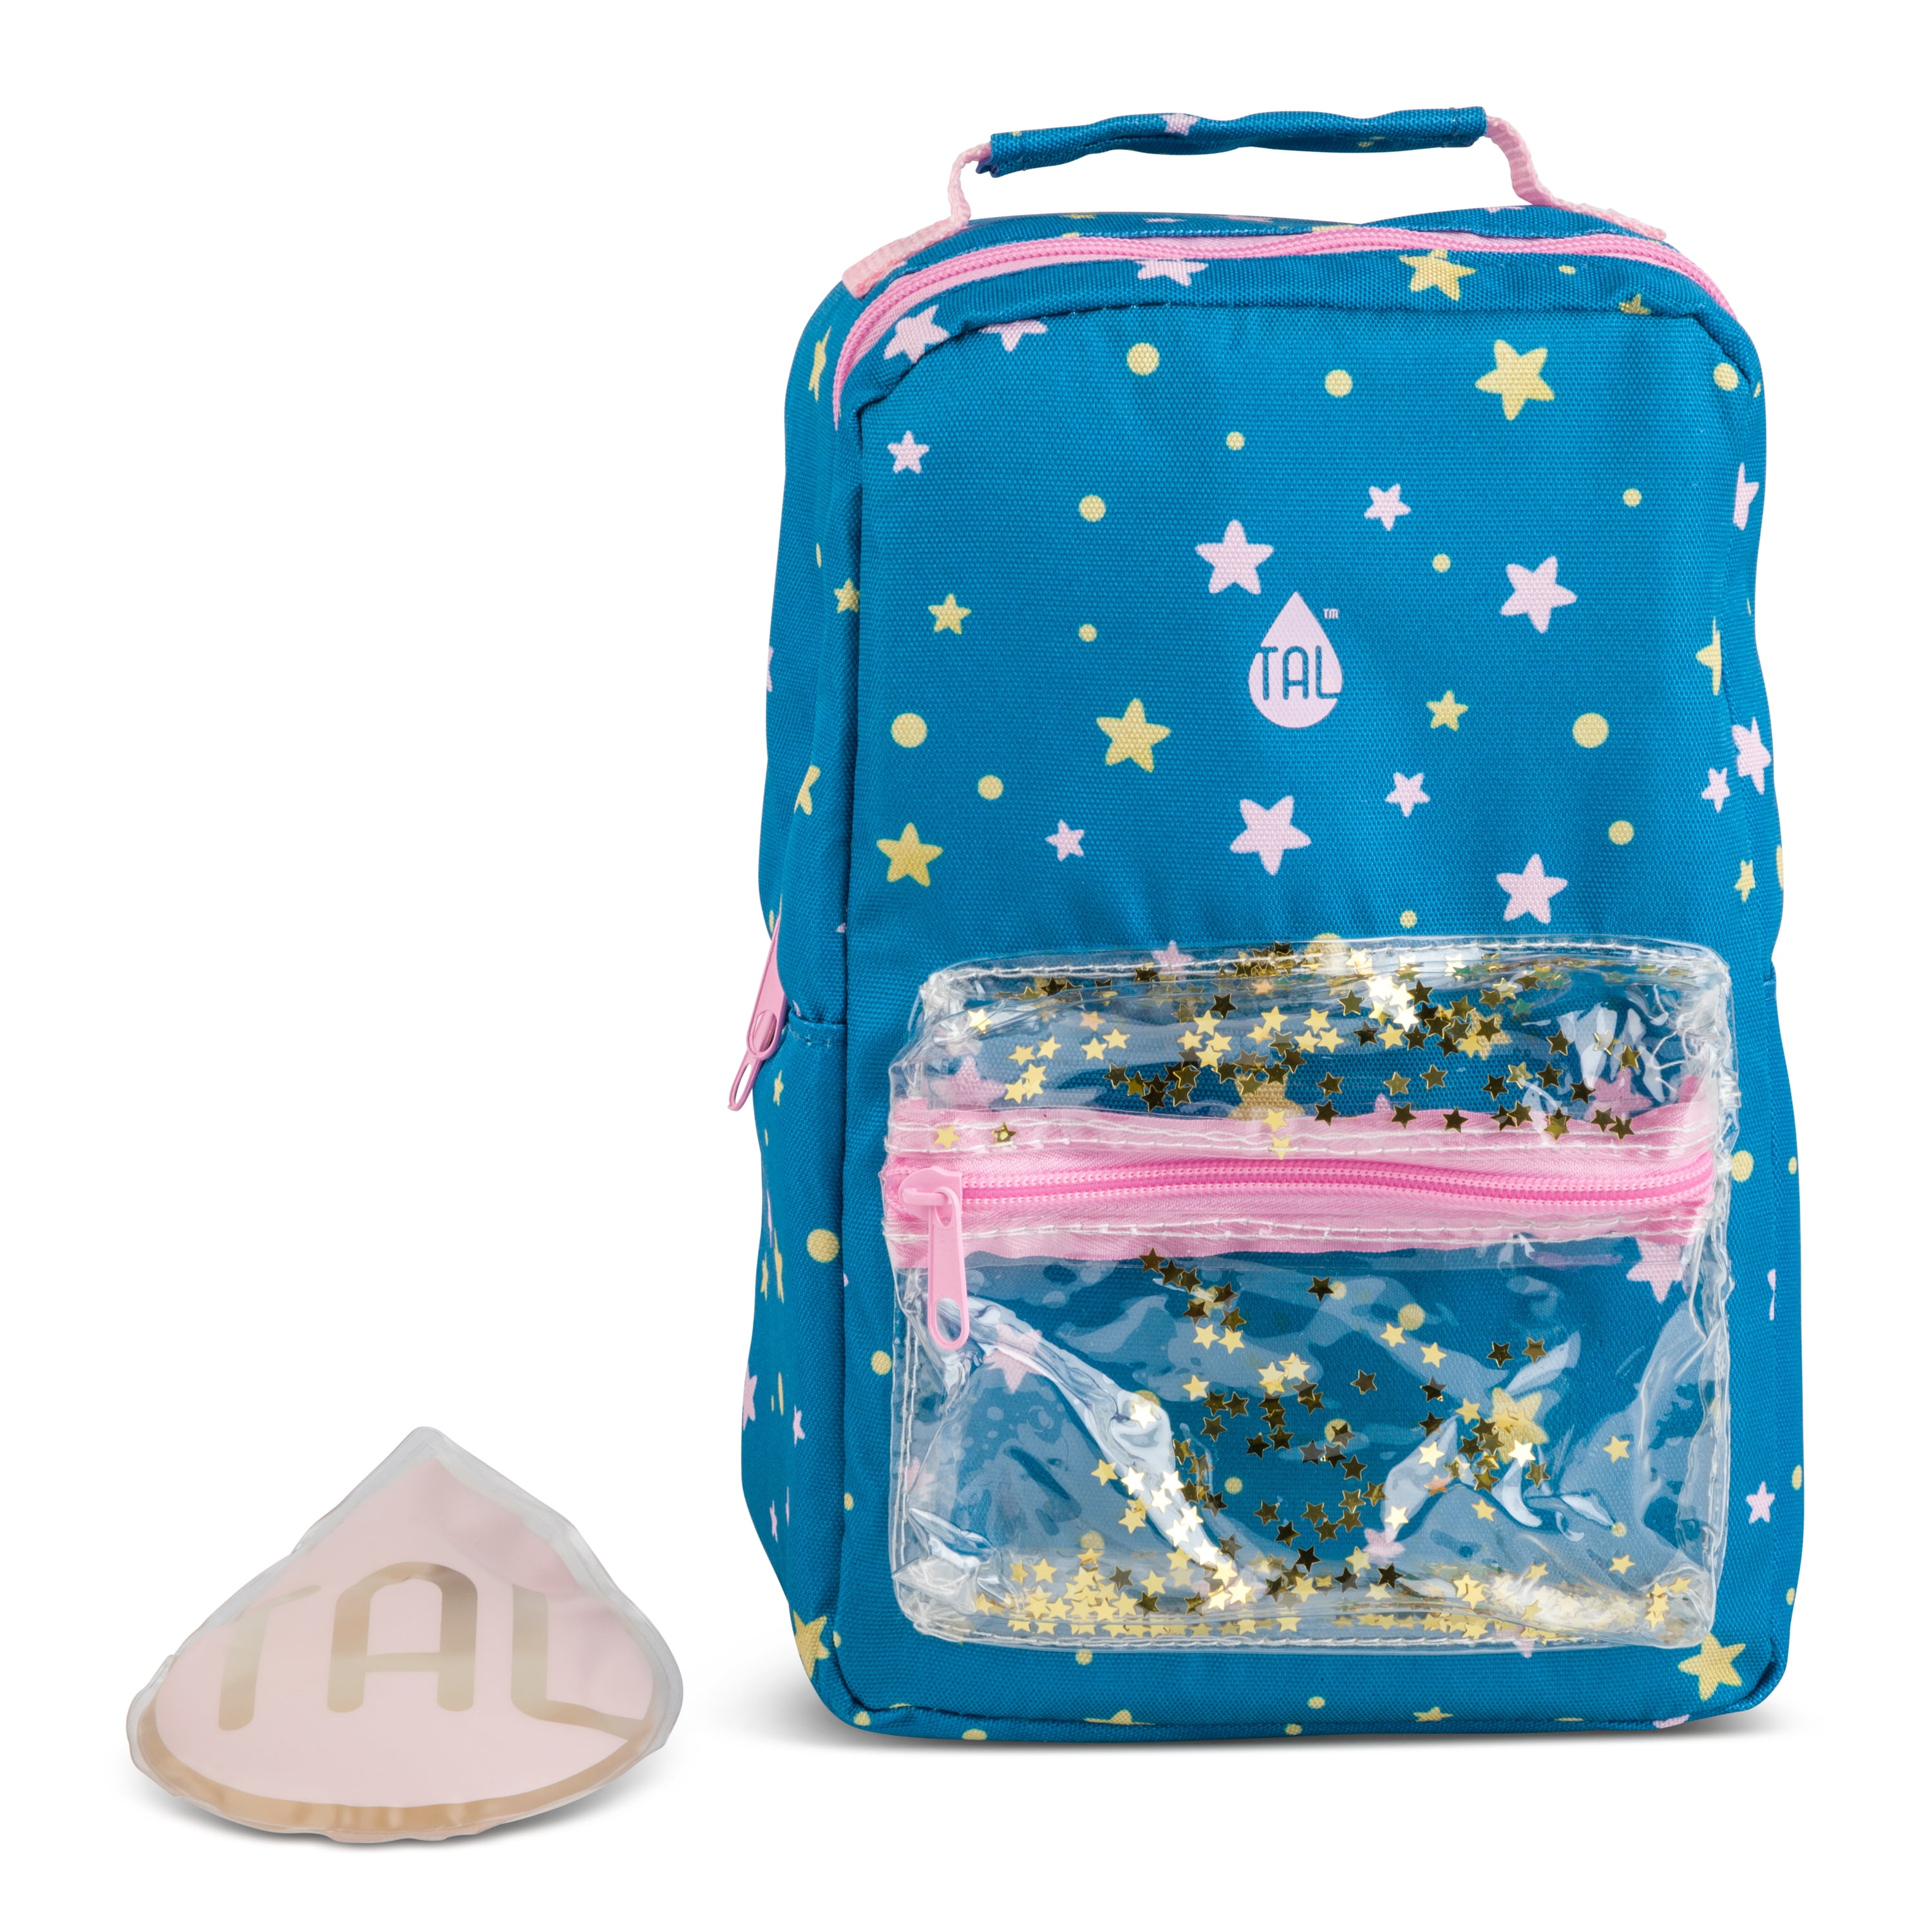 The best insulated lunch bags for kids of all ages: 7 editor's picks